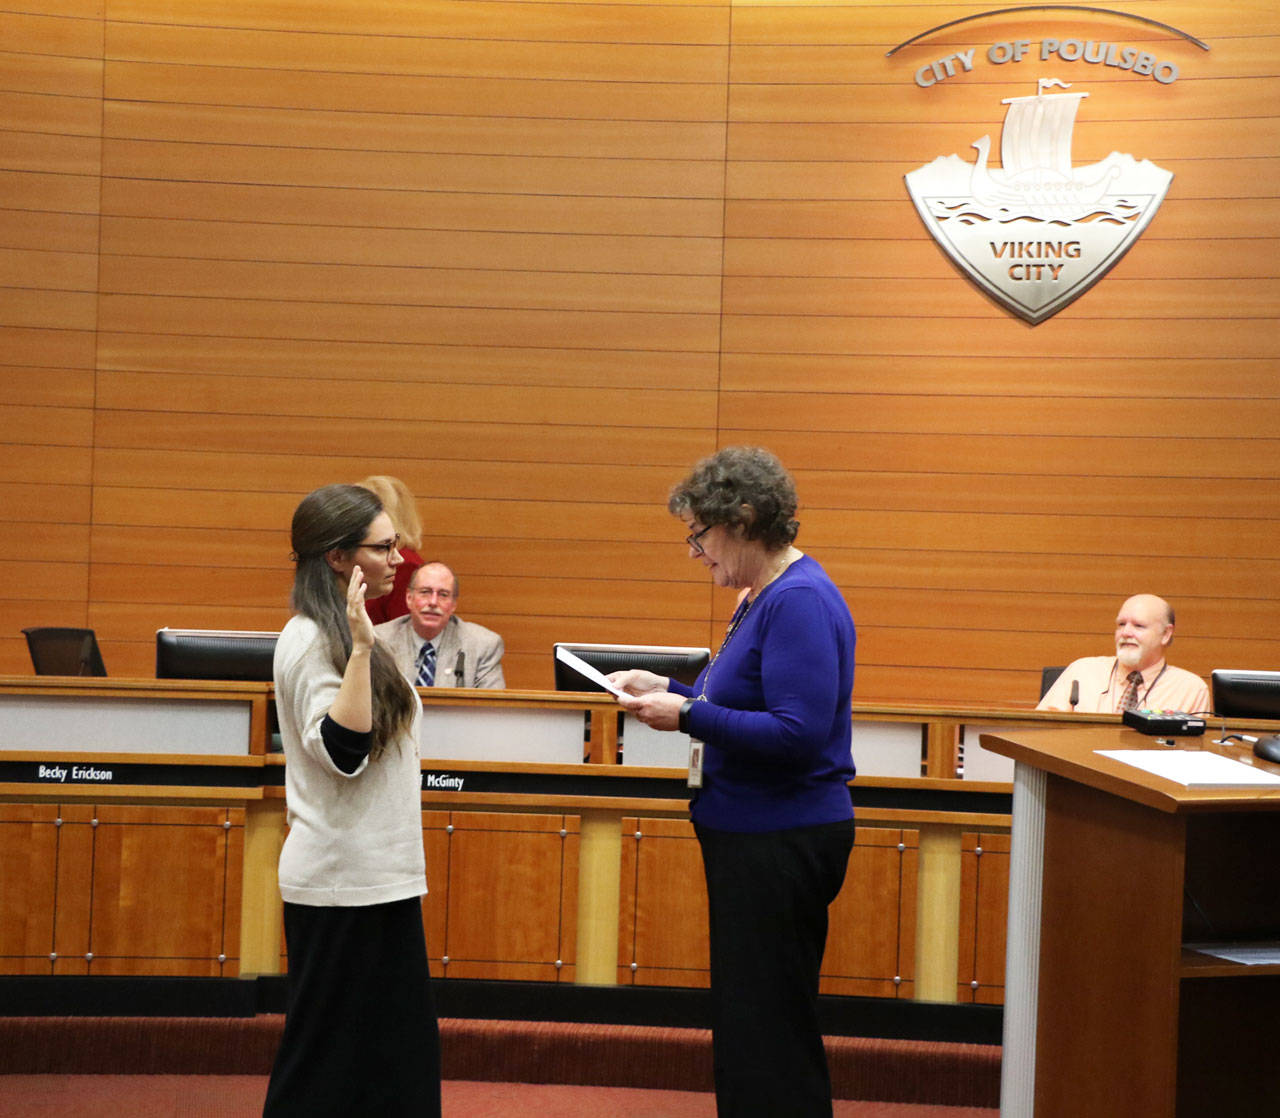 Mayor Erickson swears in new council members Britt Livdahl and Andrew Phillips. (Photos by Ken Park)